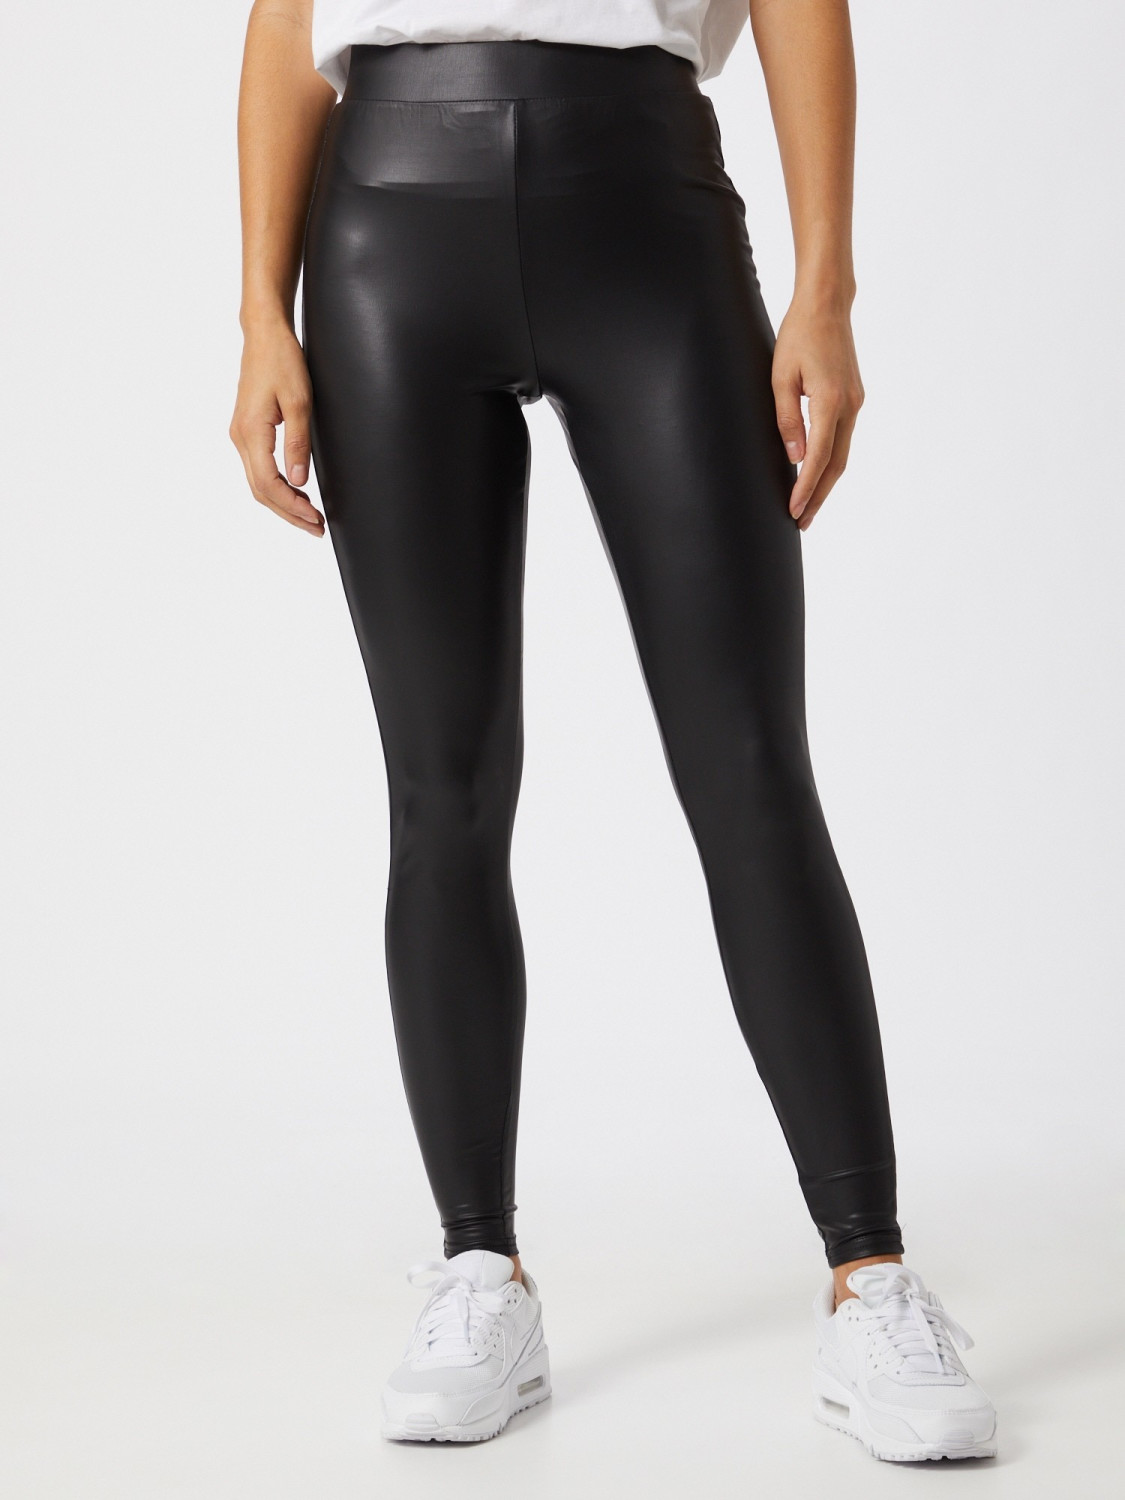 Buy Leggings Australia Time  International Society of Precision Agriculture